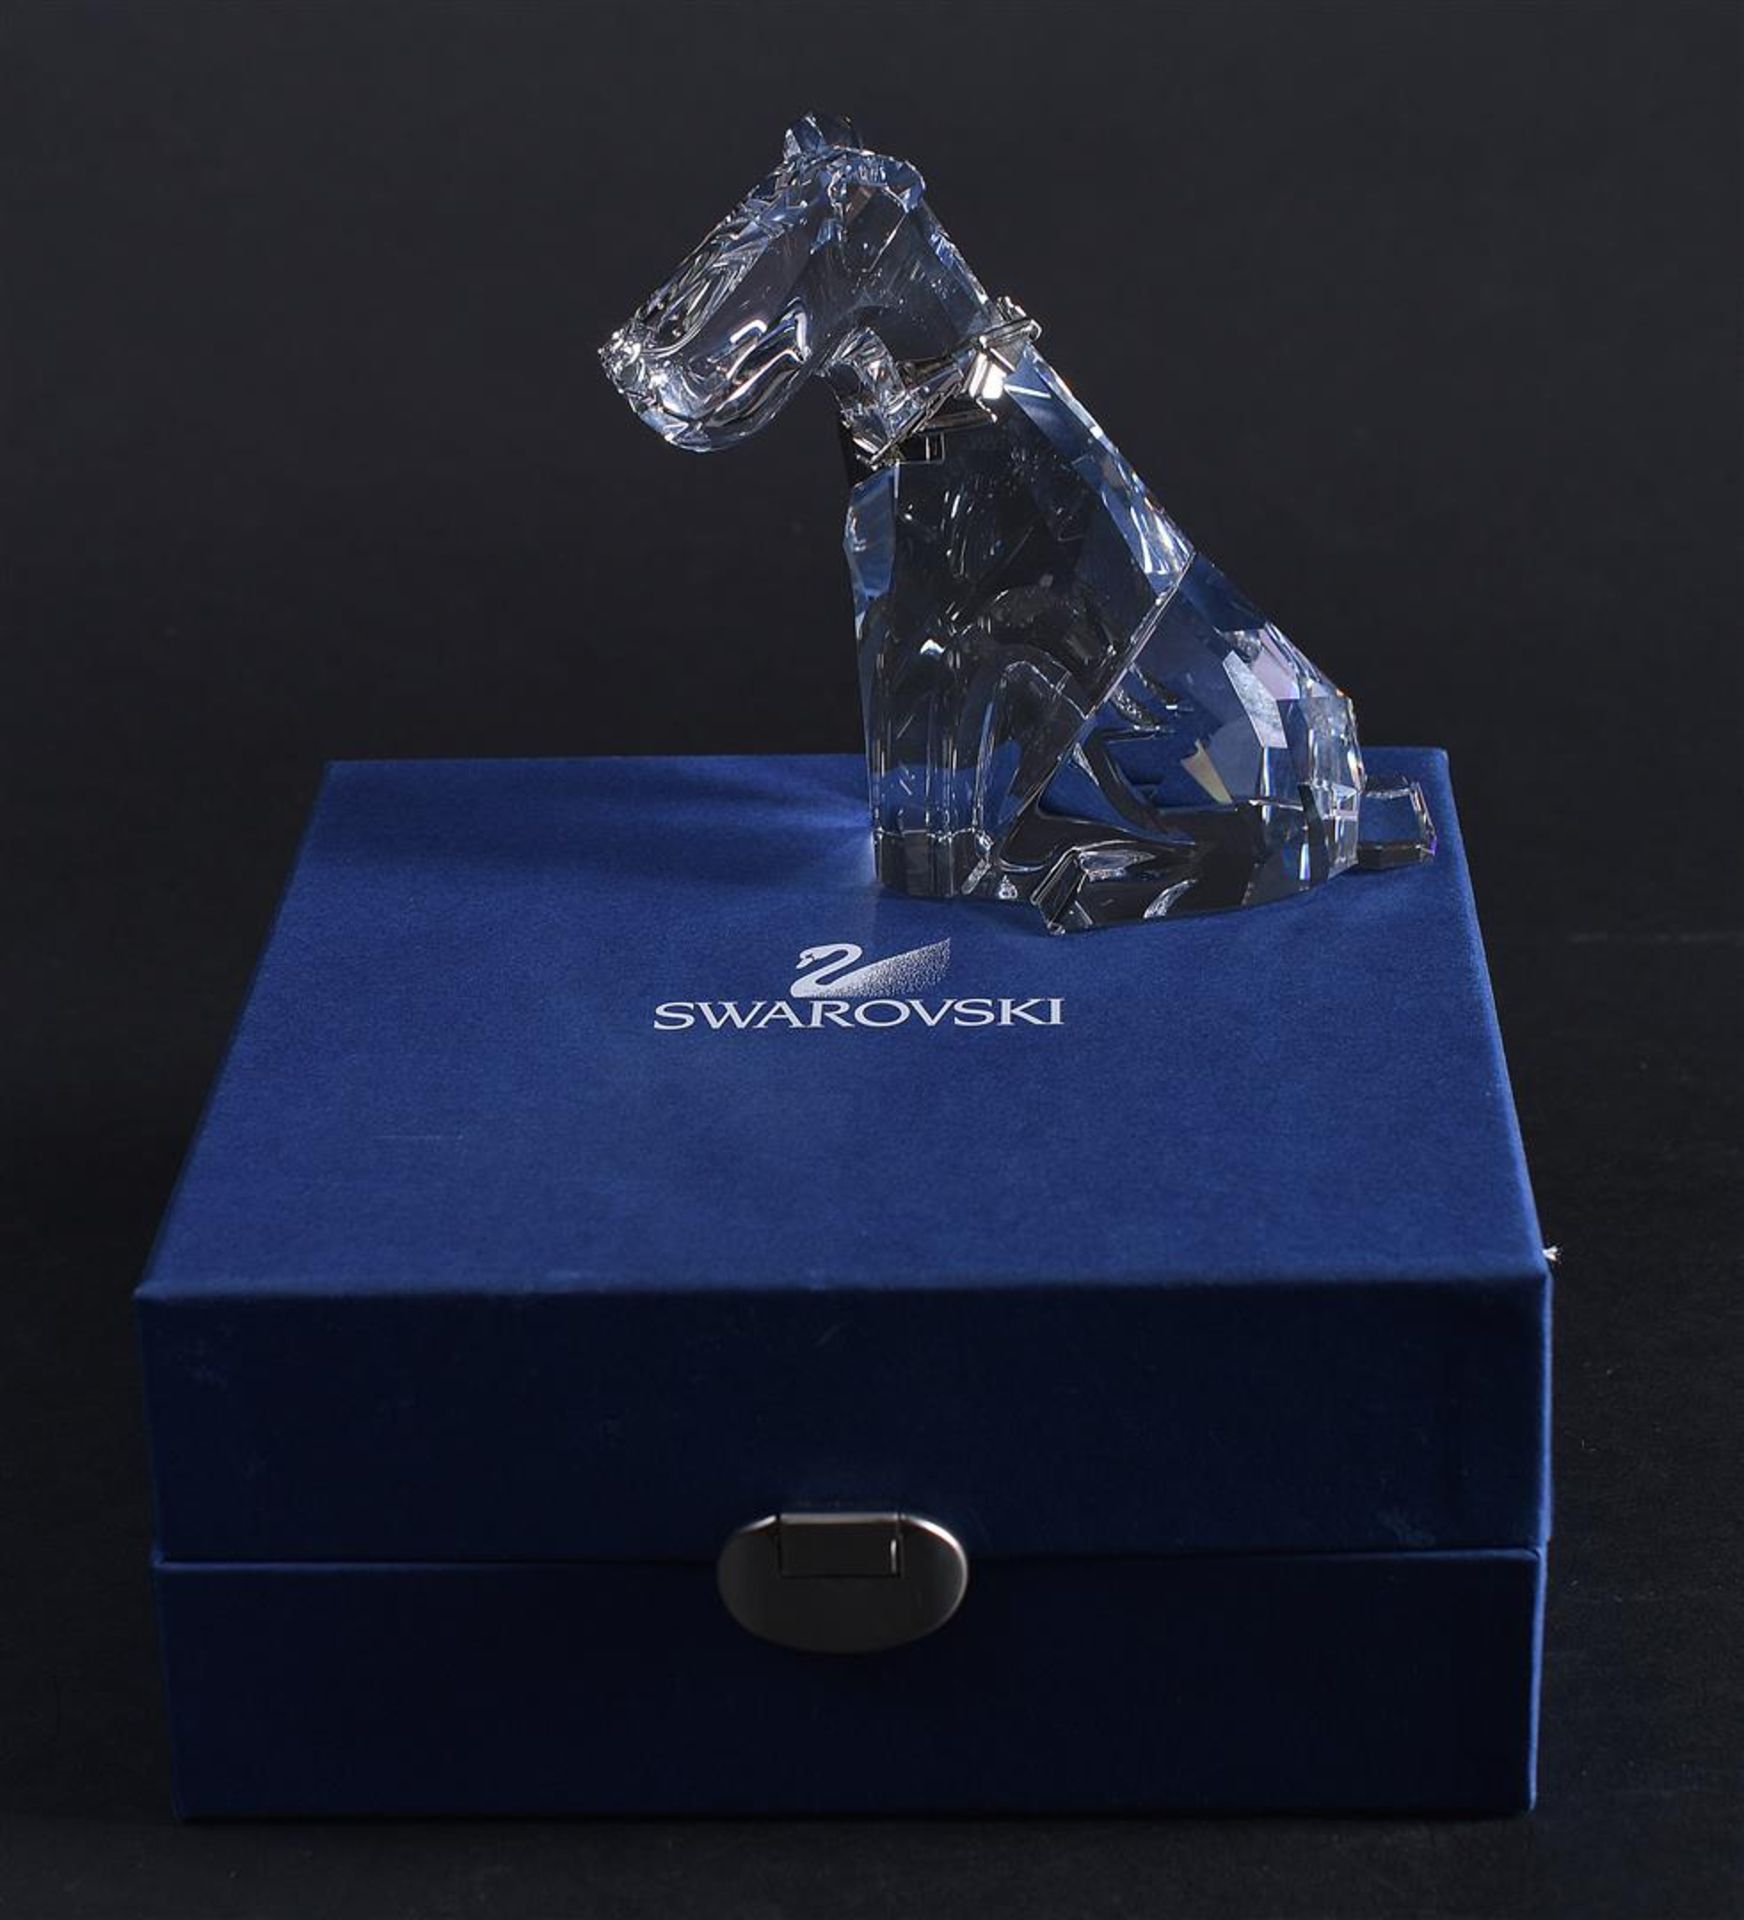 Swarovski, the dog, Year of issue 2002,289202. Includes original box.
H. 11,5 cm. - Image 5 of 5